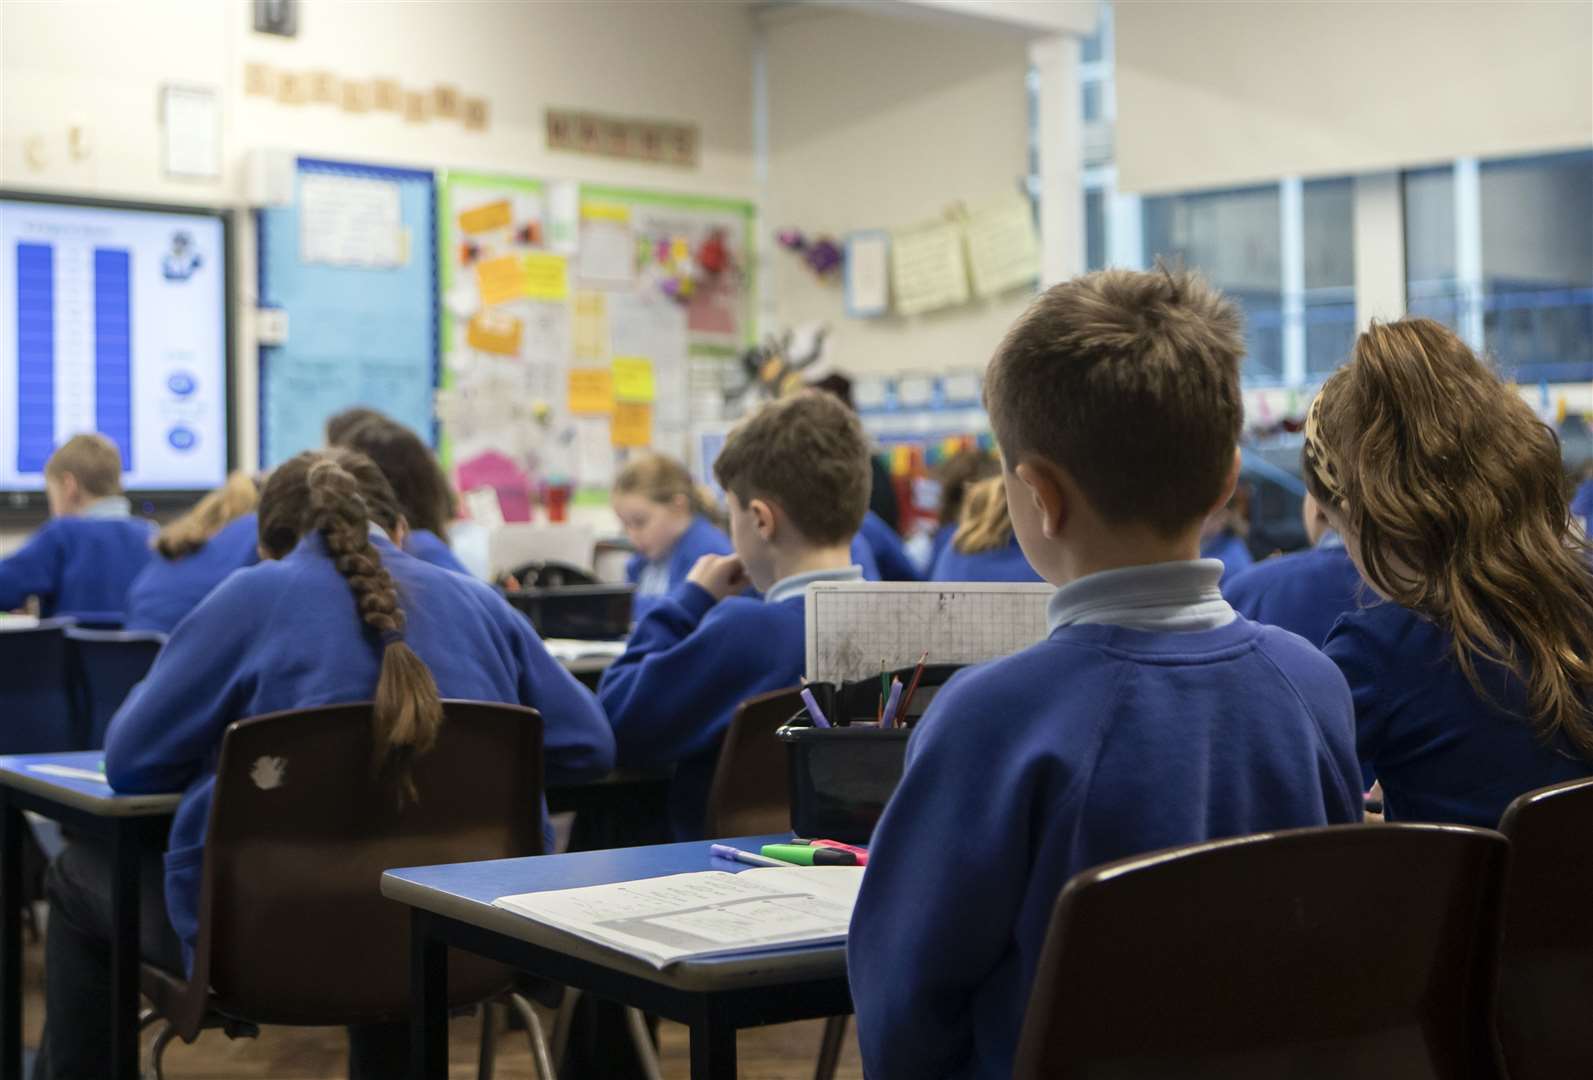 Parents can play their part in helping to keep classrooms open by agreeing to take covid tests twice a week